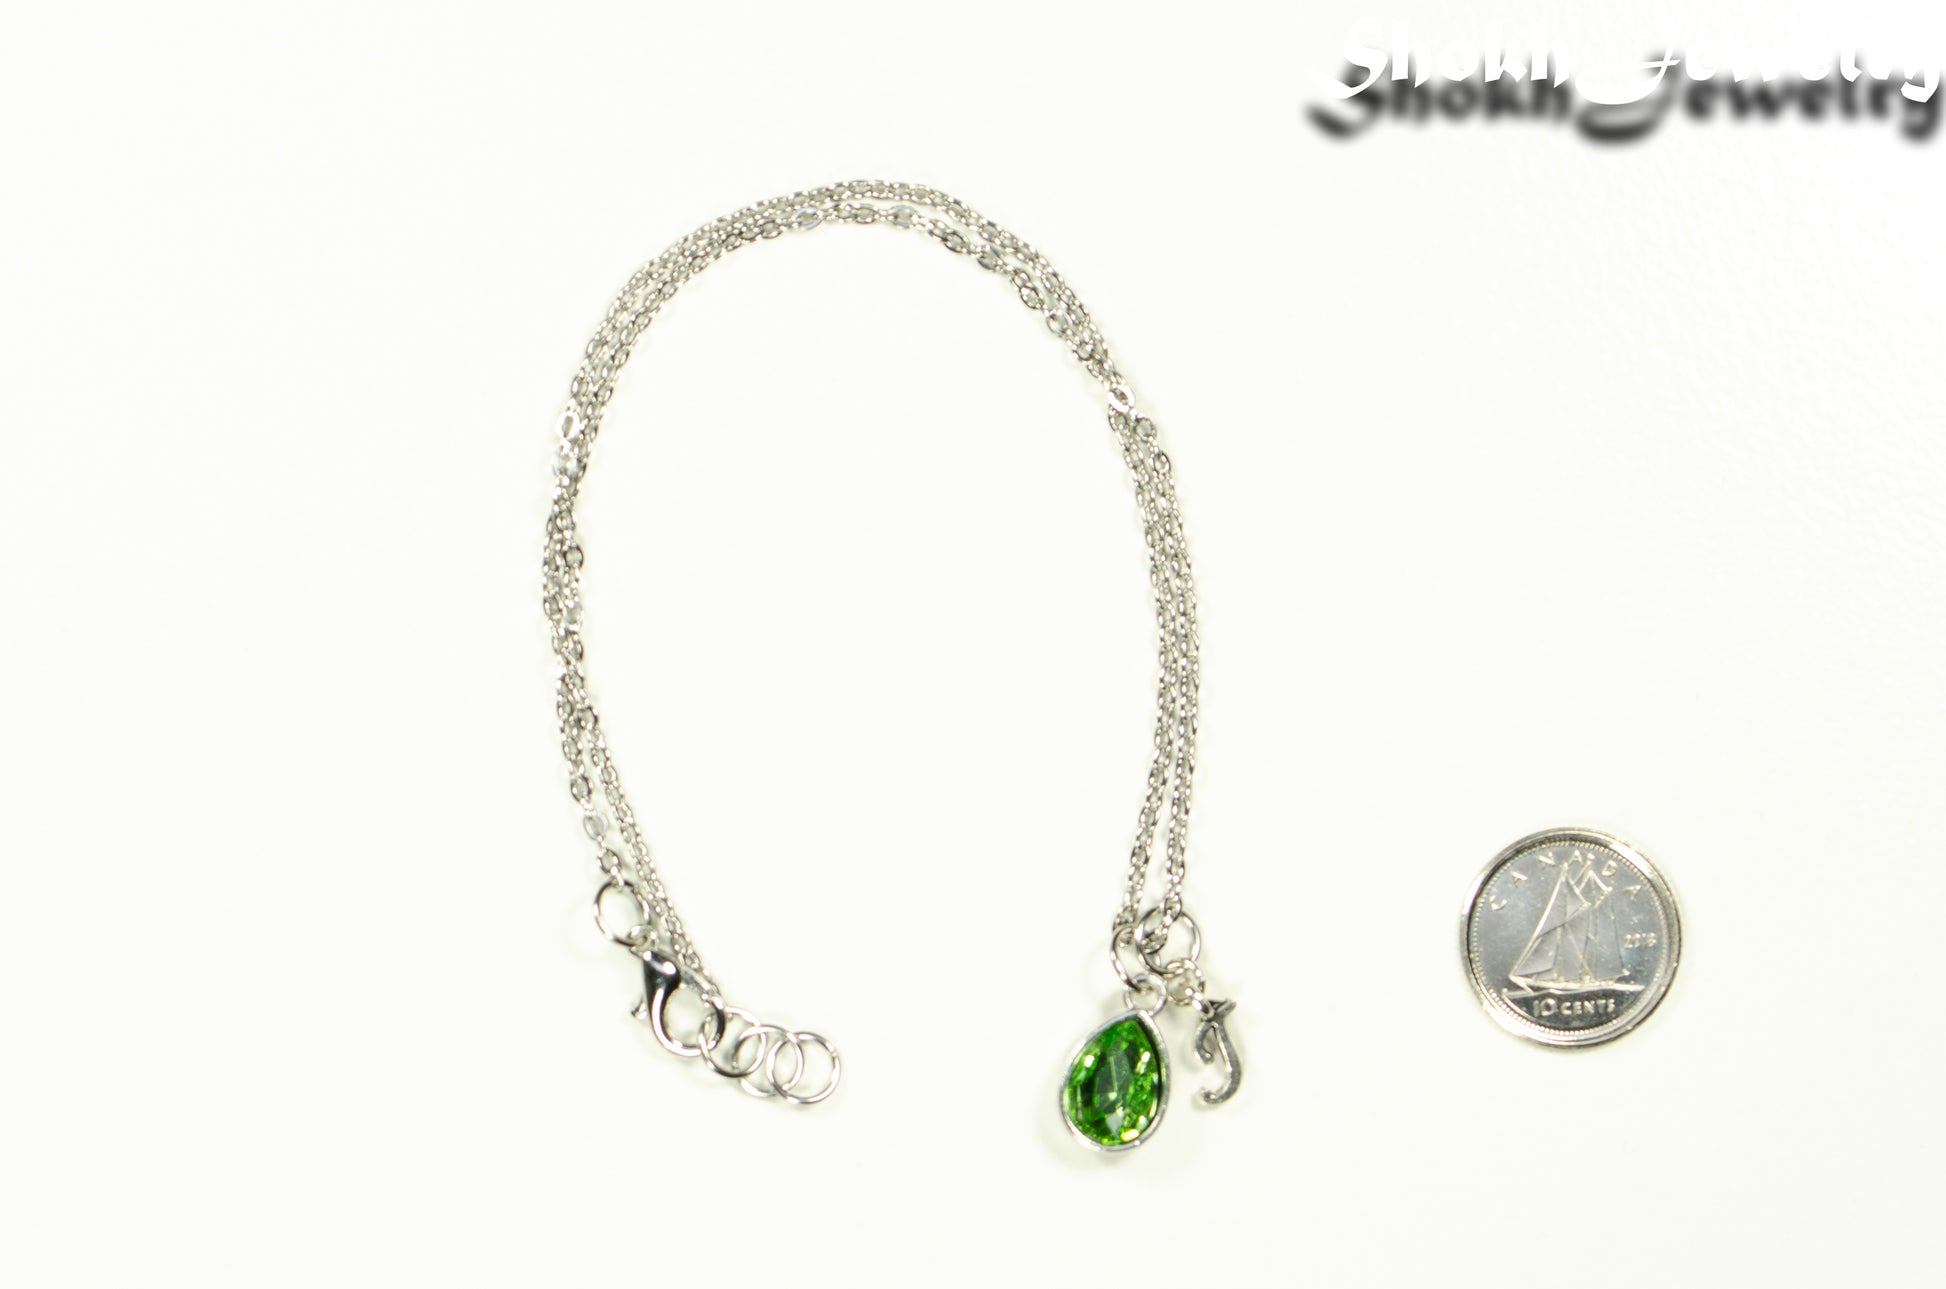 Small Personalized August Birthstone Choker Necklace beside a dime.